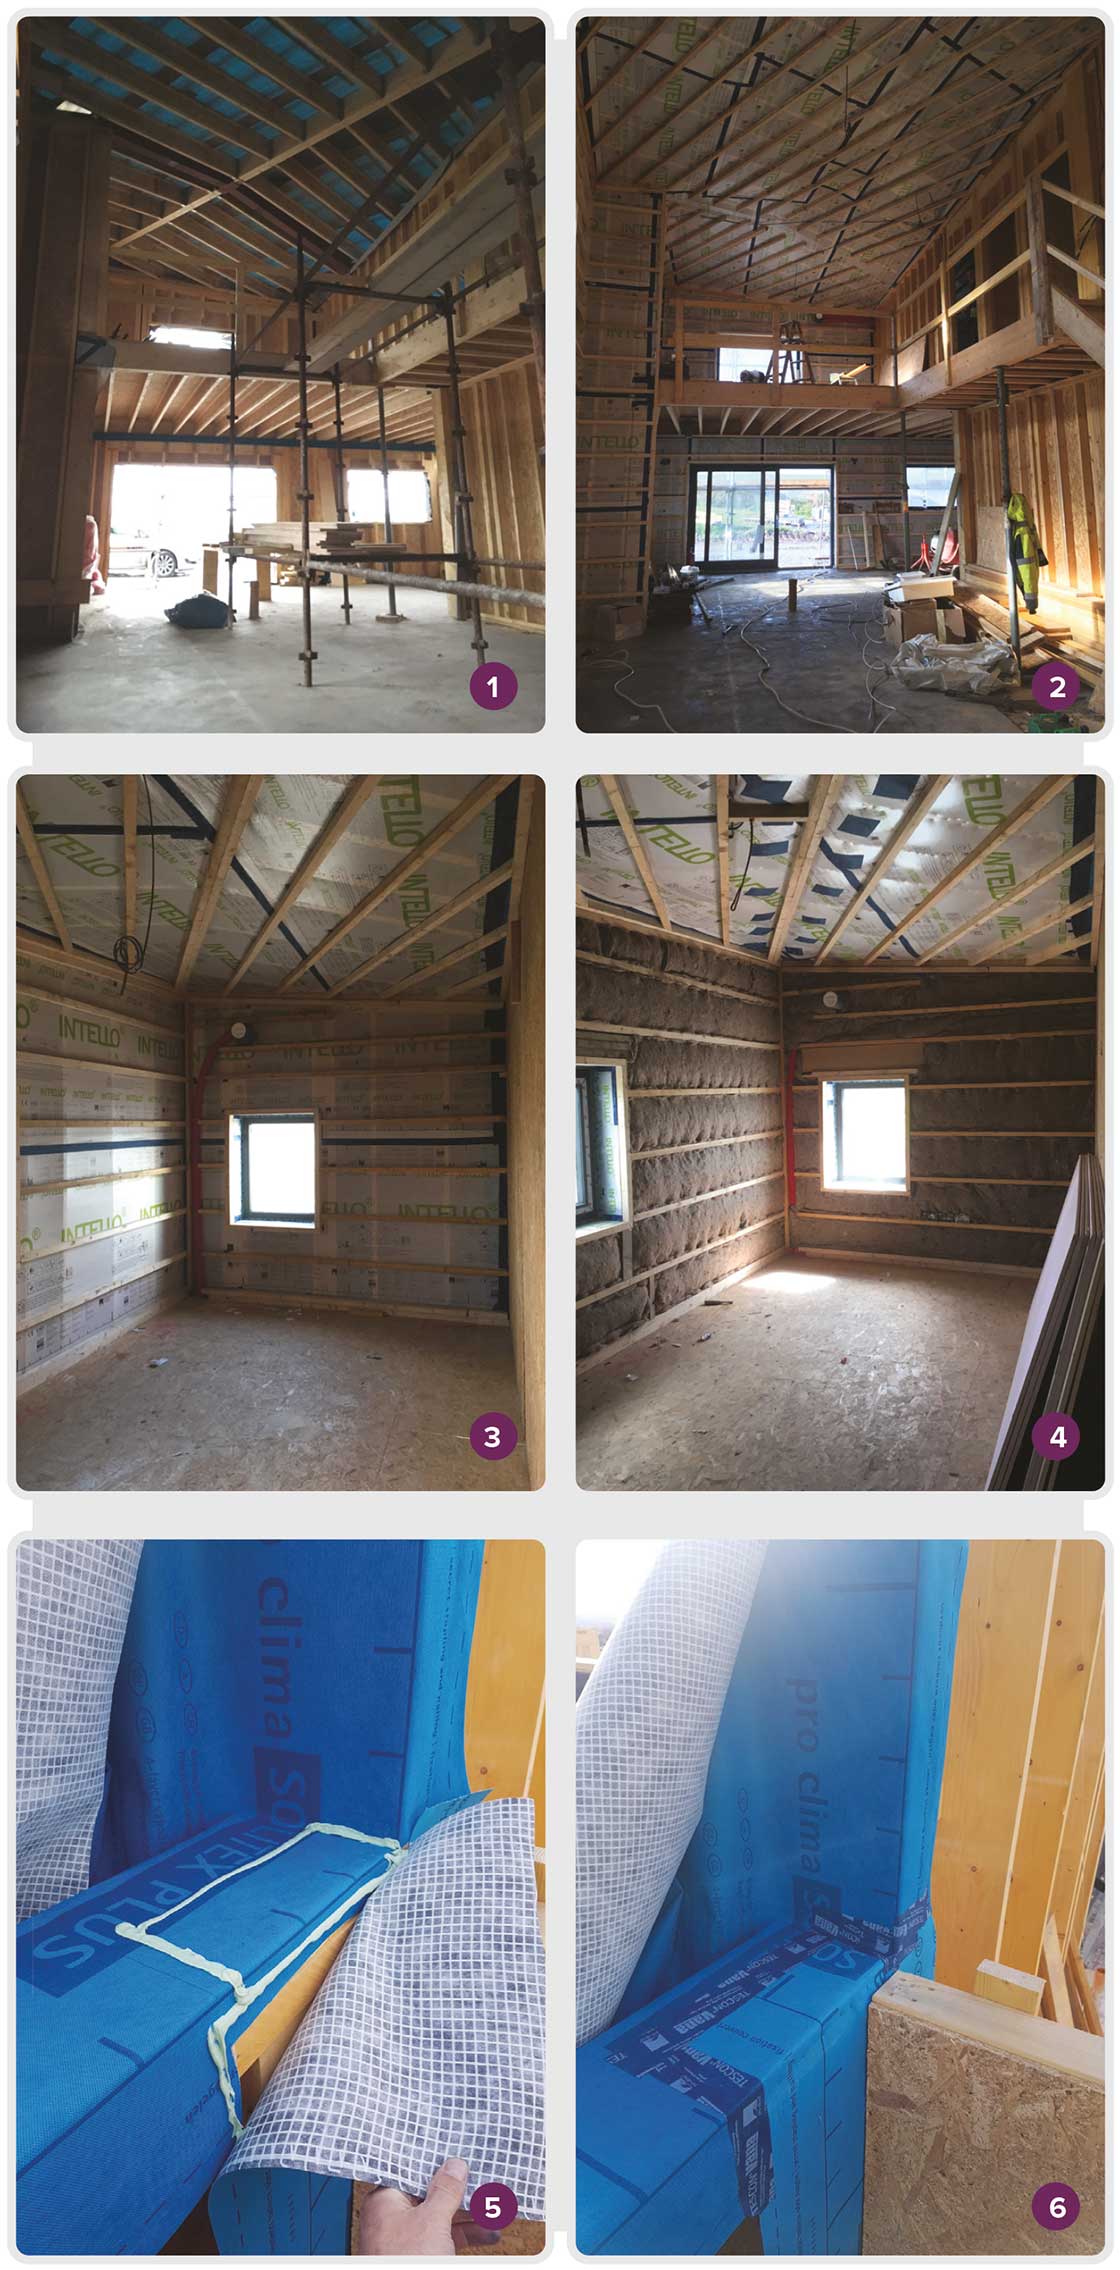 1 - 4 Sequence showing the build-up of the timber frame structure internally, with an Intello vapour control membrane and a service cavity insulated with Thermafl eece sheep wool insulation; 5 & 6 airtightness sealing with pro clima Solitex Plus with continuous membrane running behind internal walls to minimise leakage.